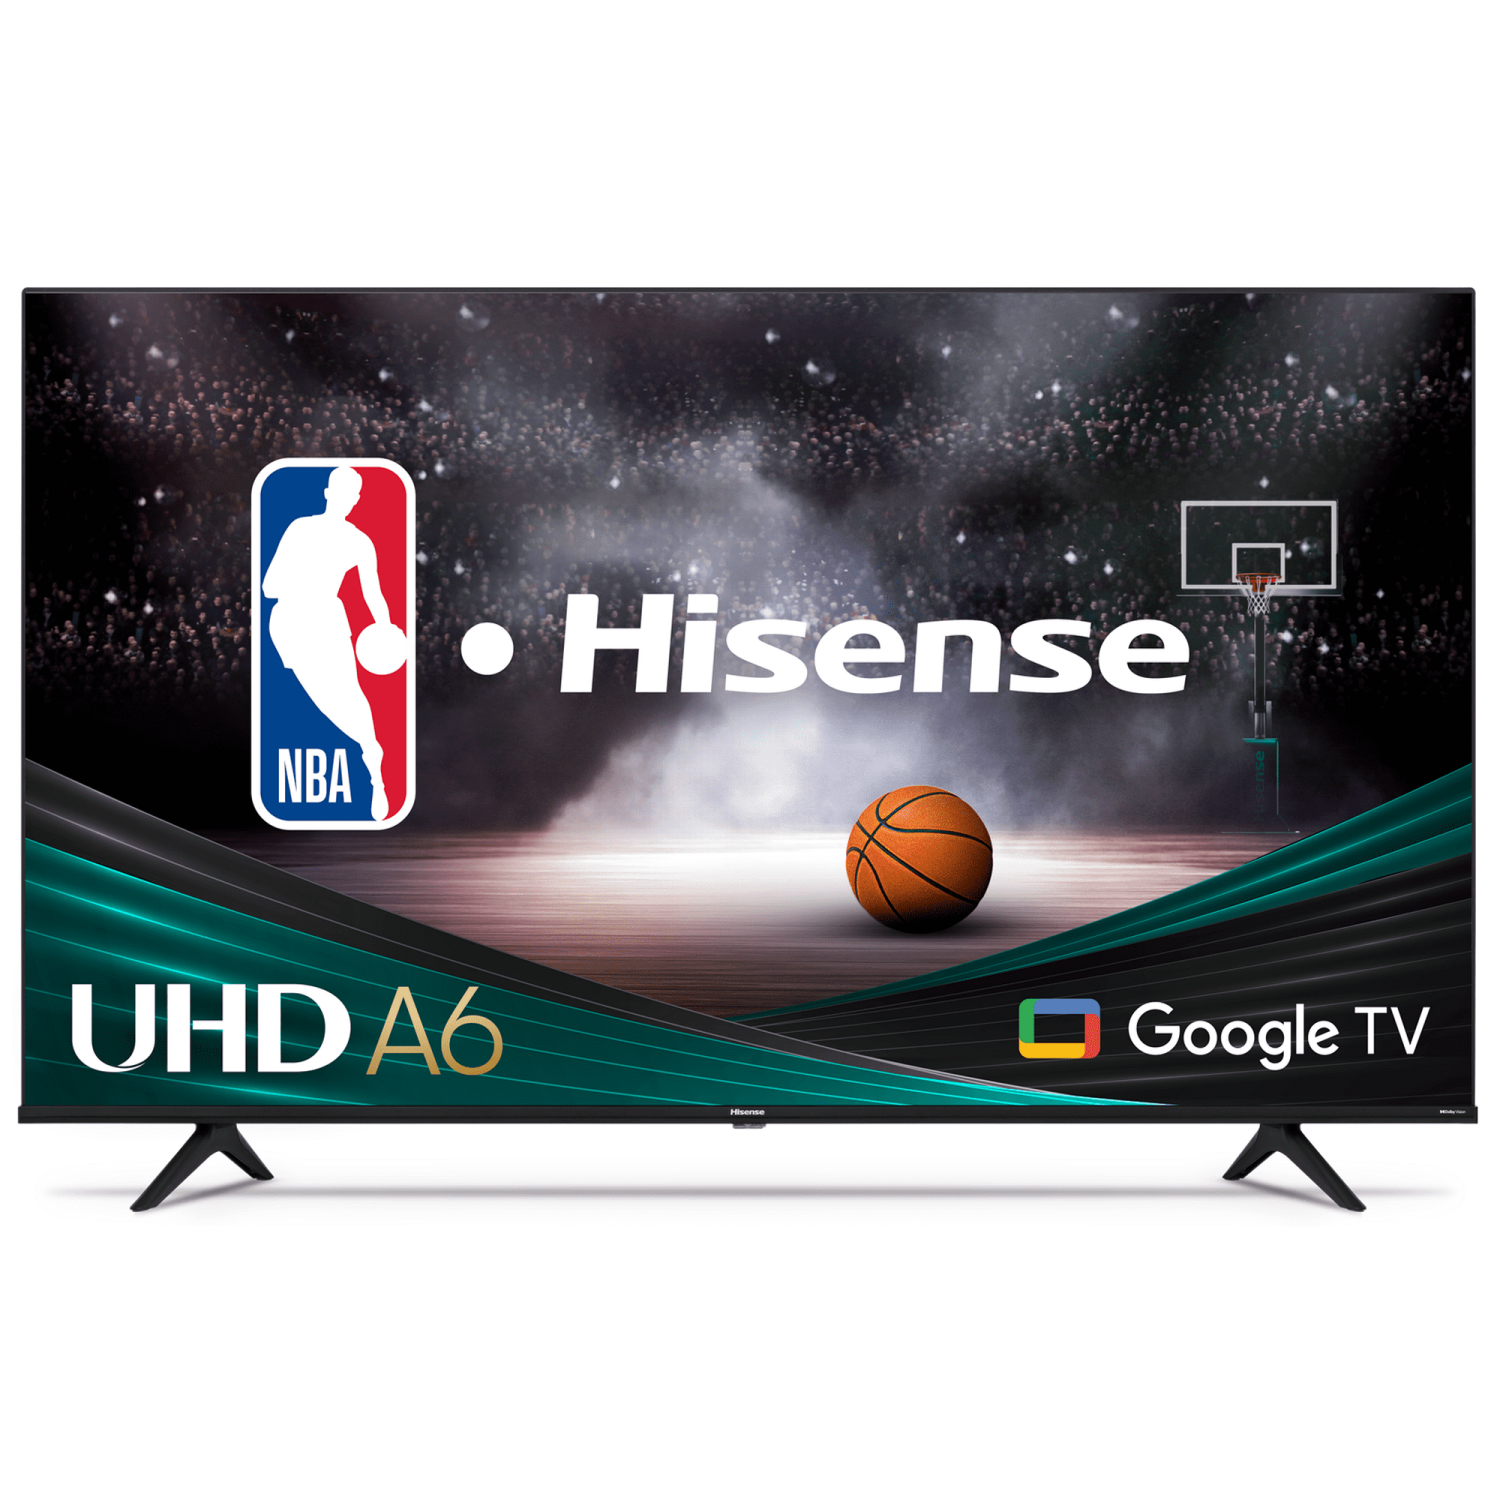 REFURBISHED (GOOD) - Hisense 65" Class 4K UHD Google Smart TV HDR A6H Series (65A6H)**LOCAL TORONTO DELIVERY ONLY**